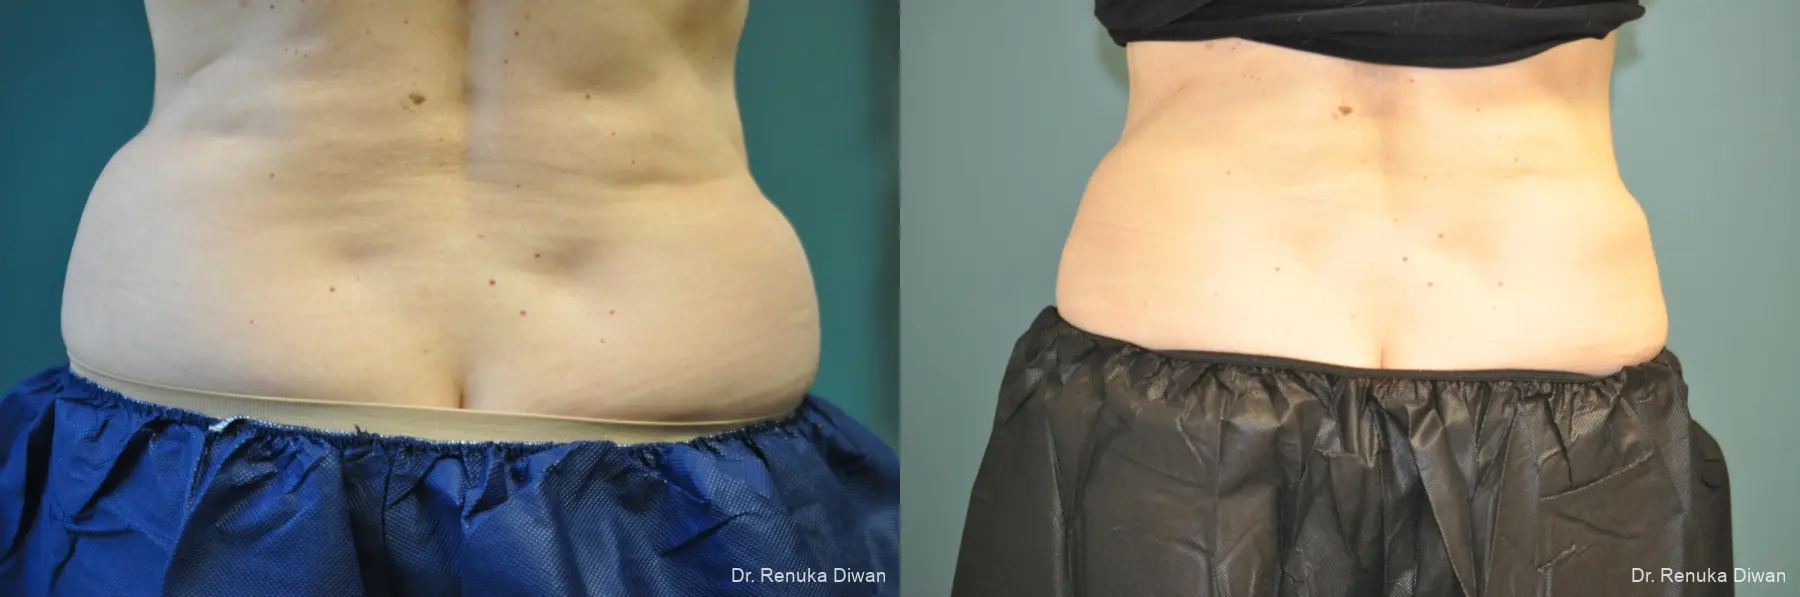 CoolSculpting®: Patient 3 - Before and After  